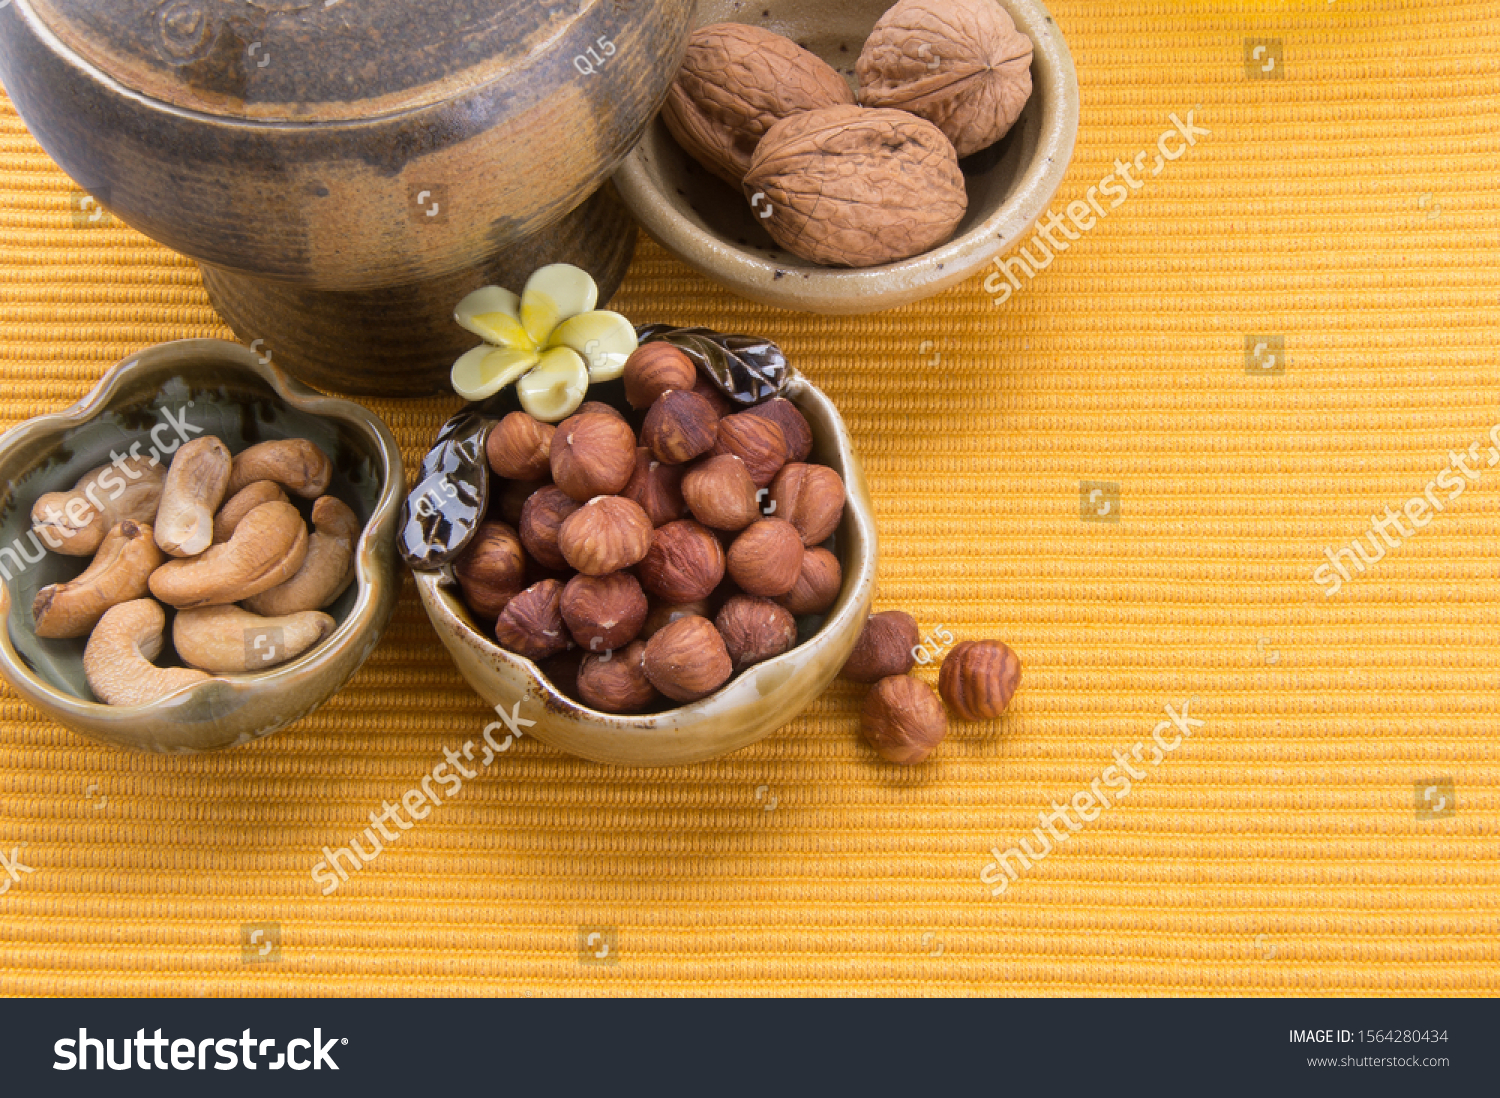 nuts or hazelnuts nuts and mix nut on a background new #1564280434